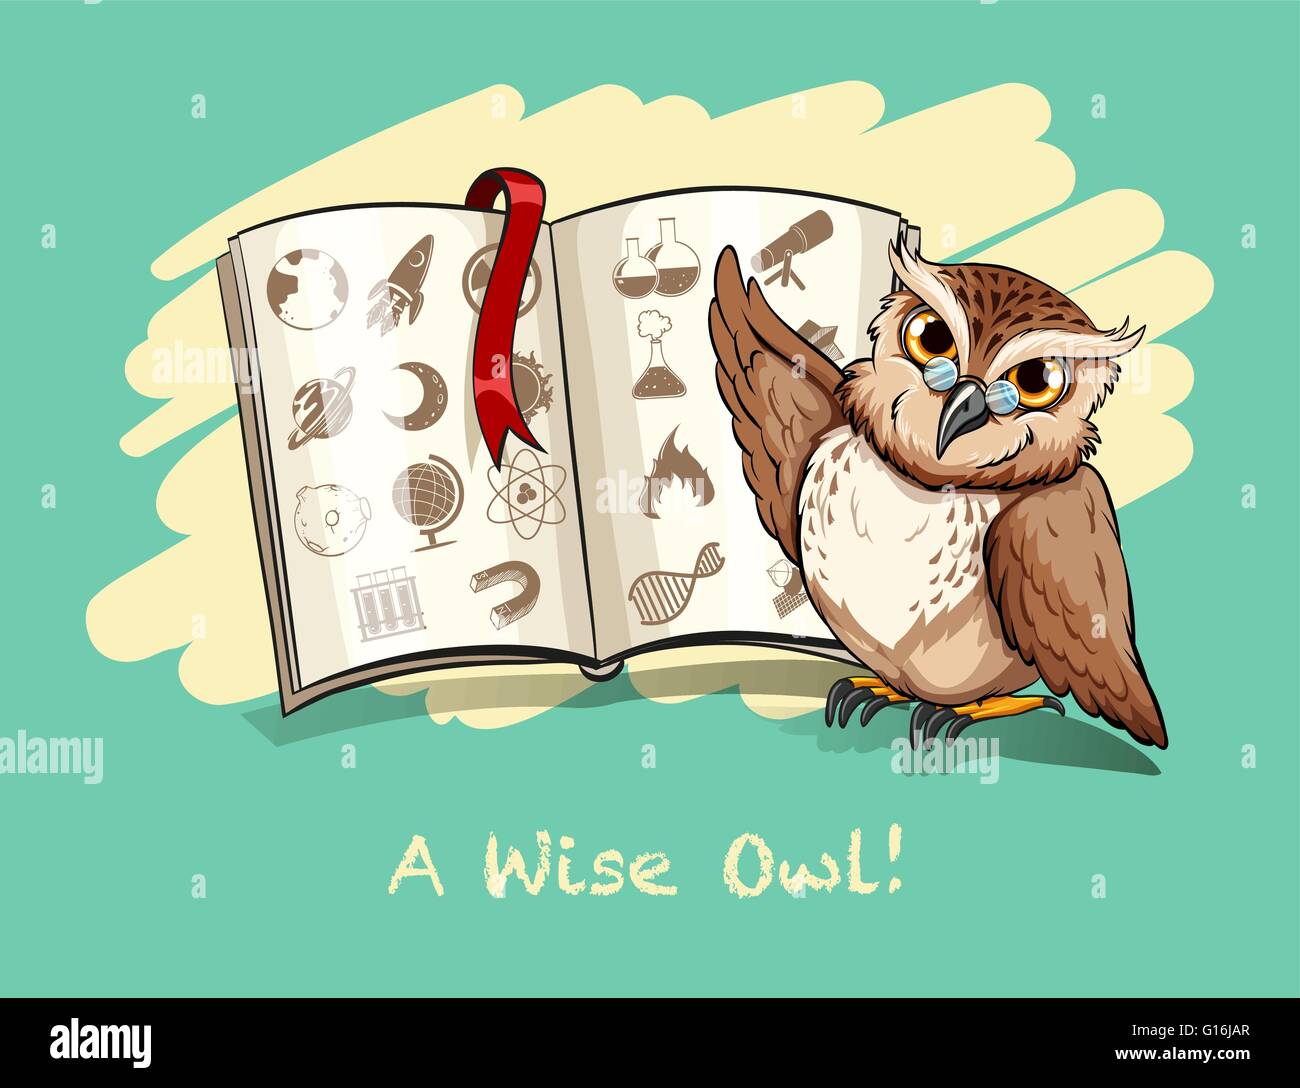 Idiom a wise owl illustration Stock Vector